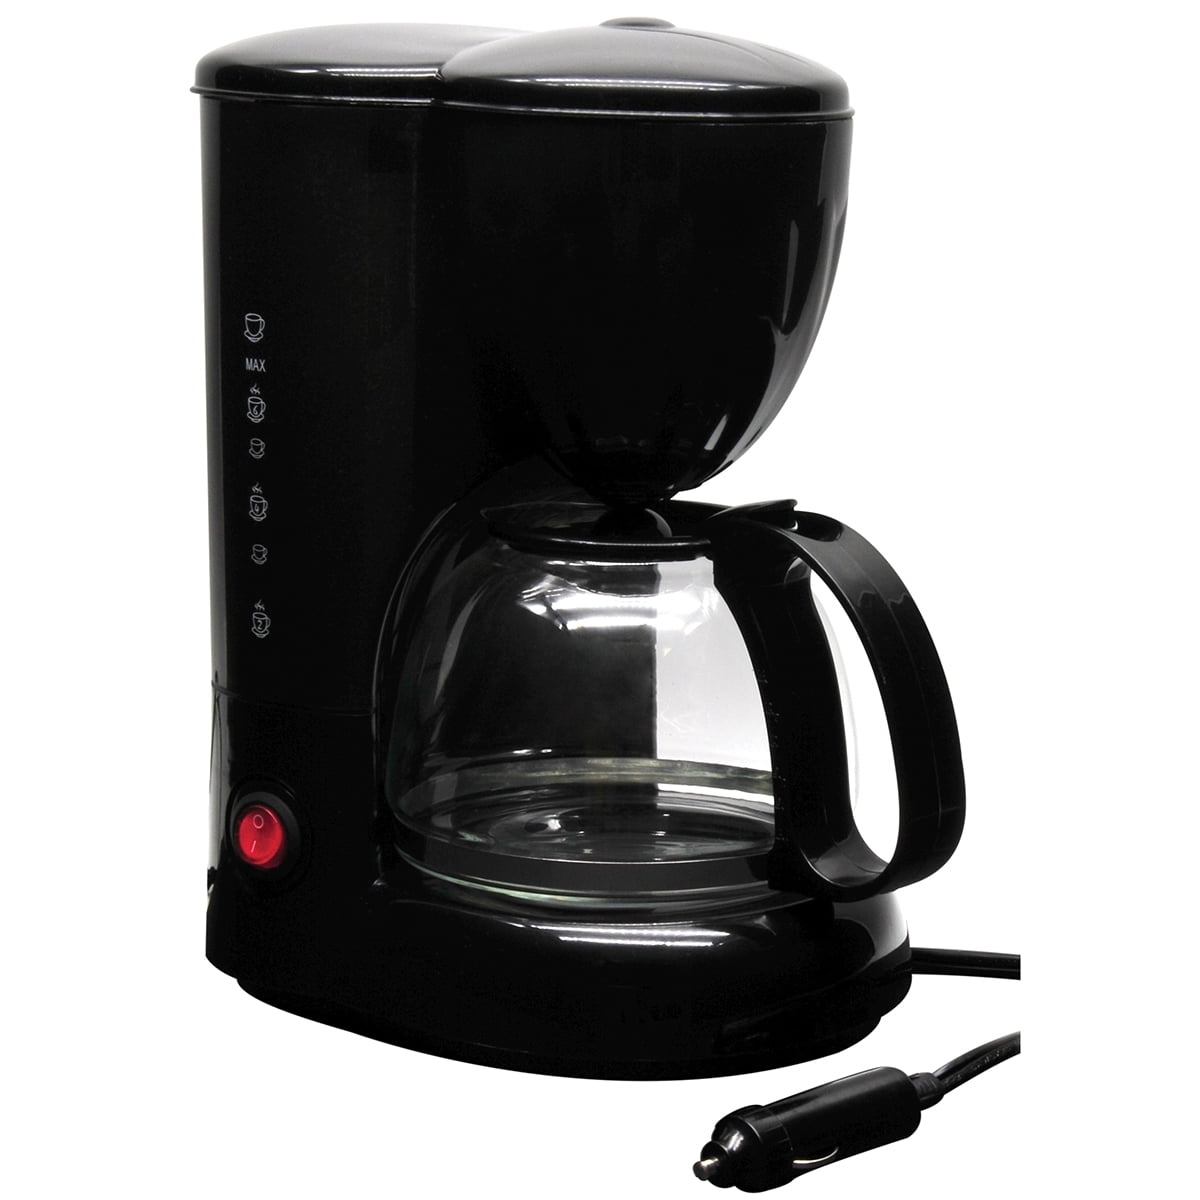 Rpsc785 12v Coffee Maker With Glass Carafe